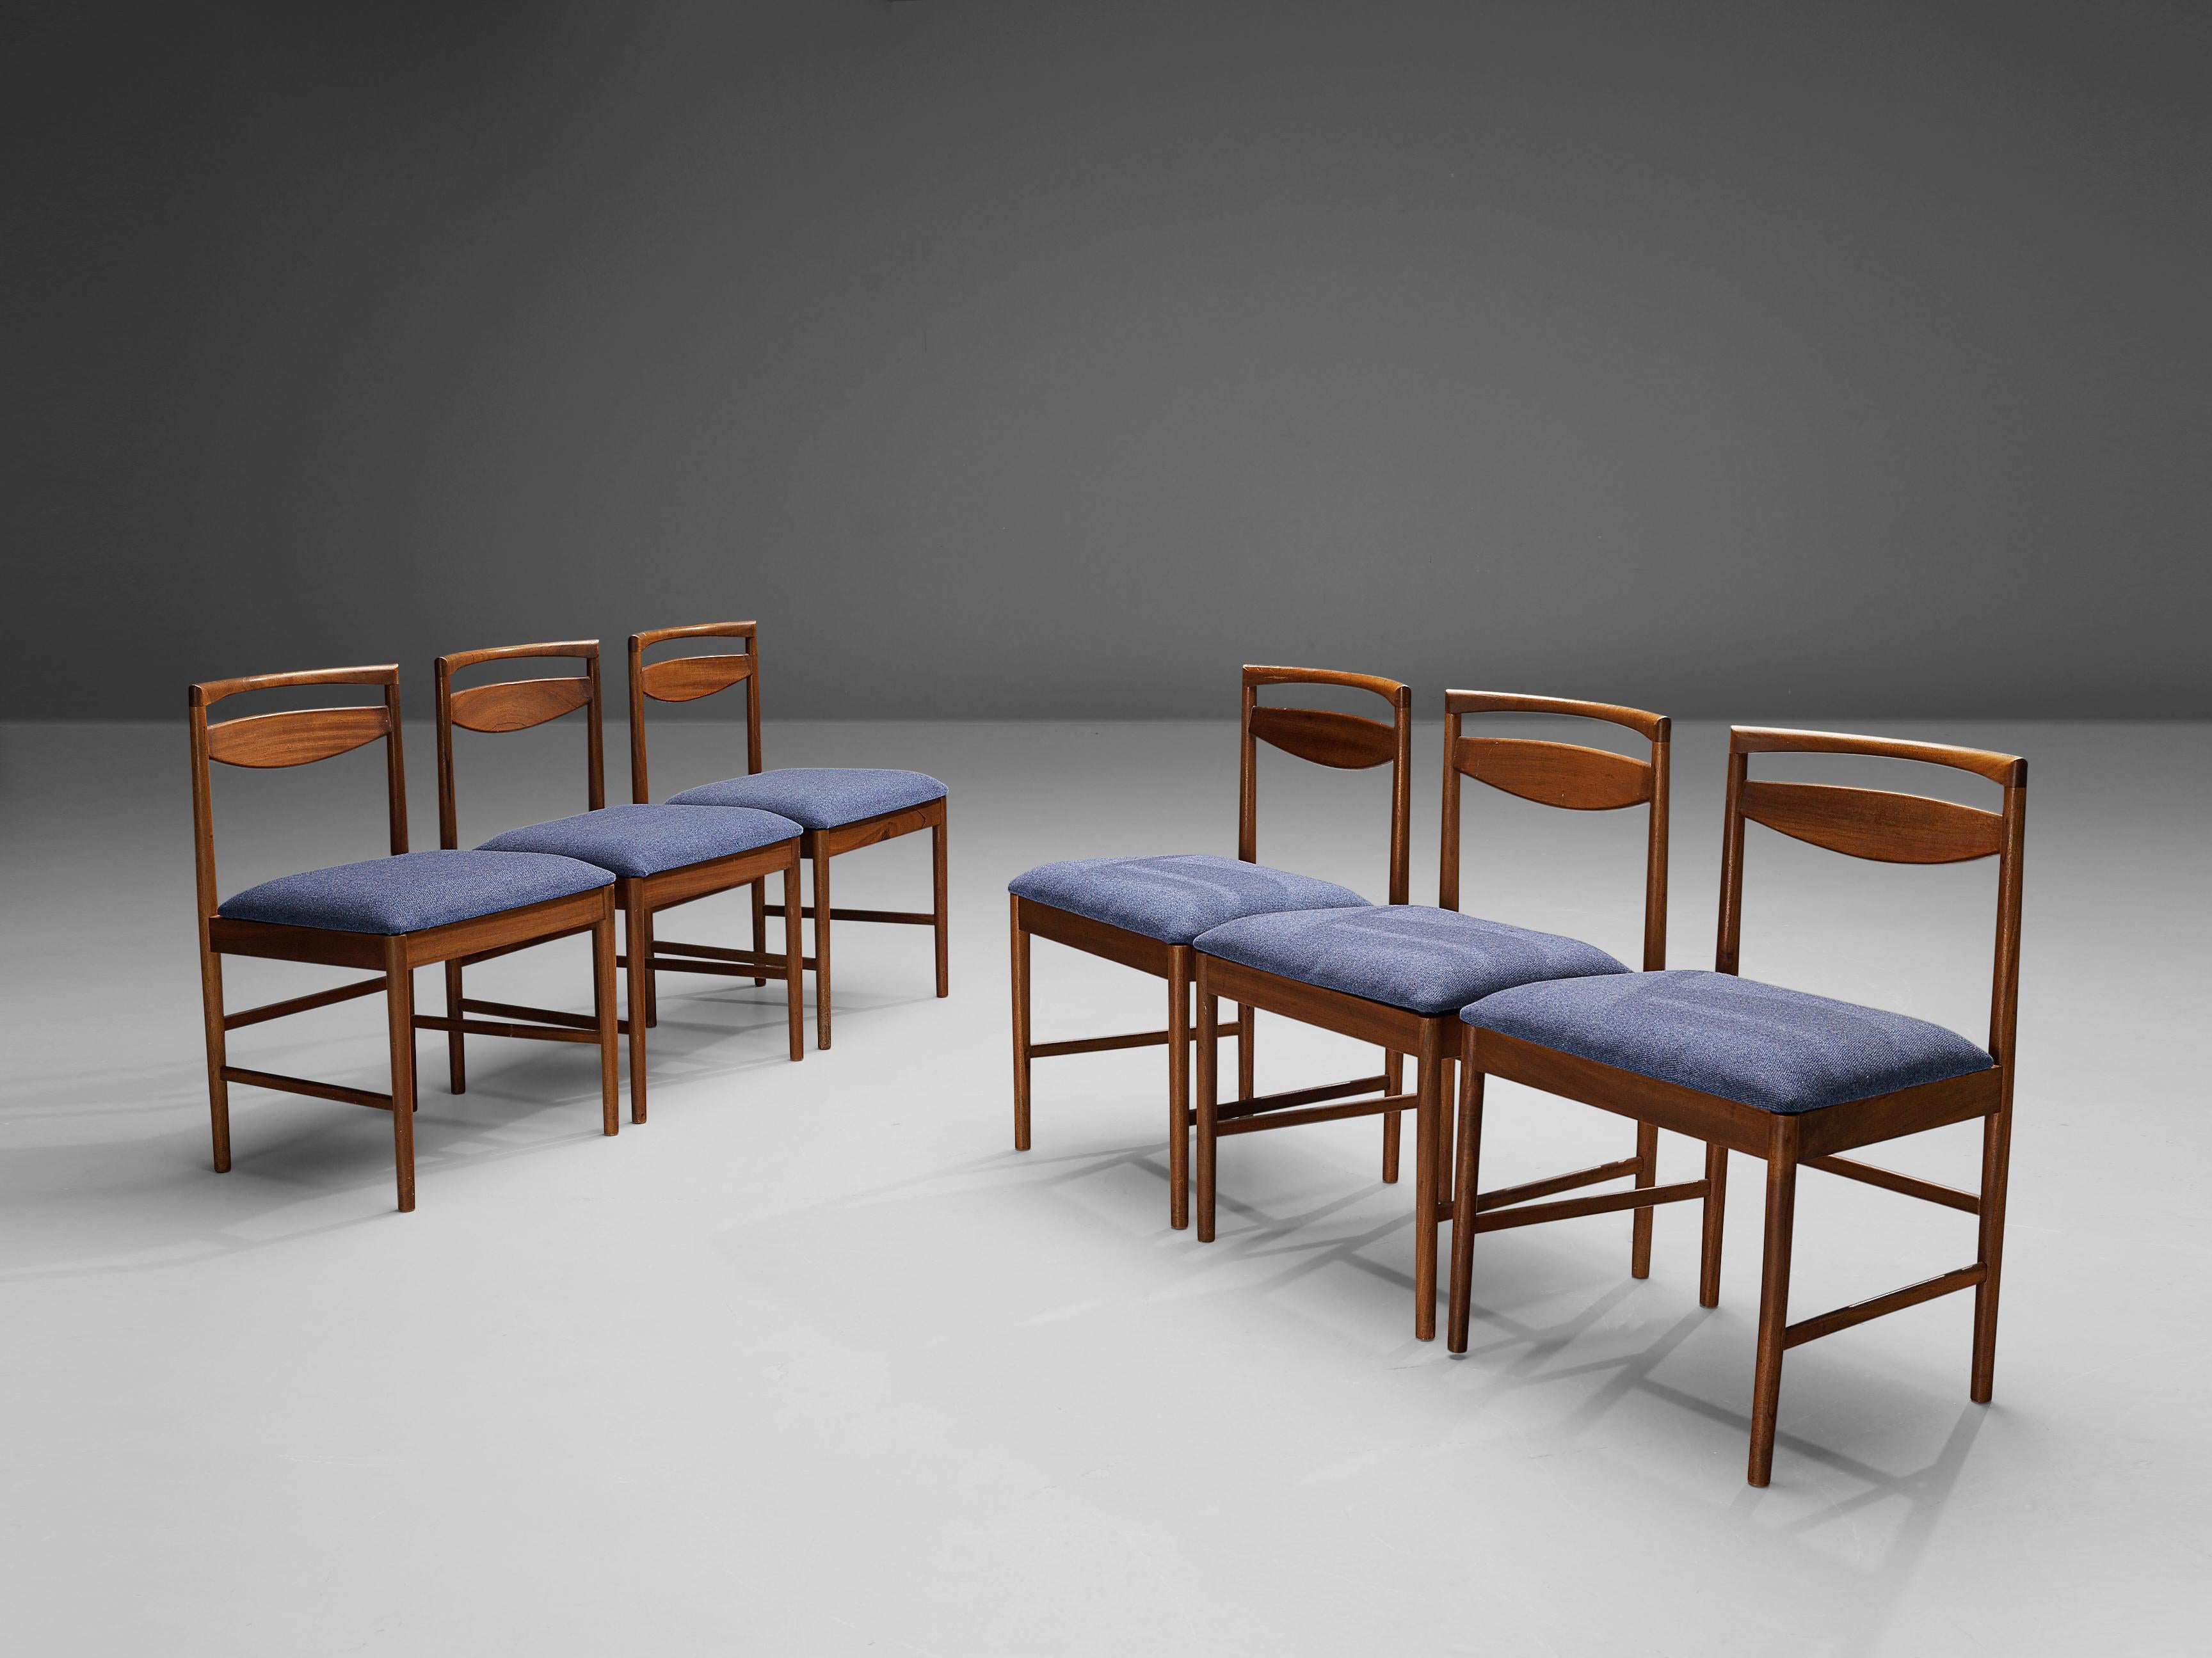 Scottish Set of Six Dining Chairs in Teak and Blue Upholstery 